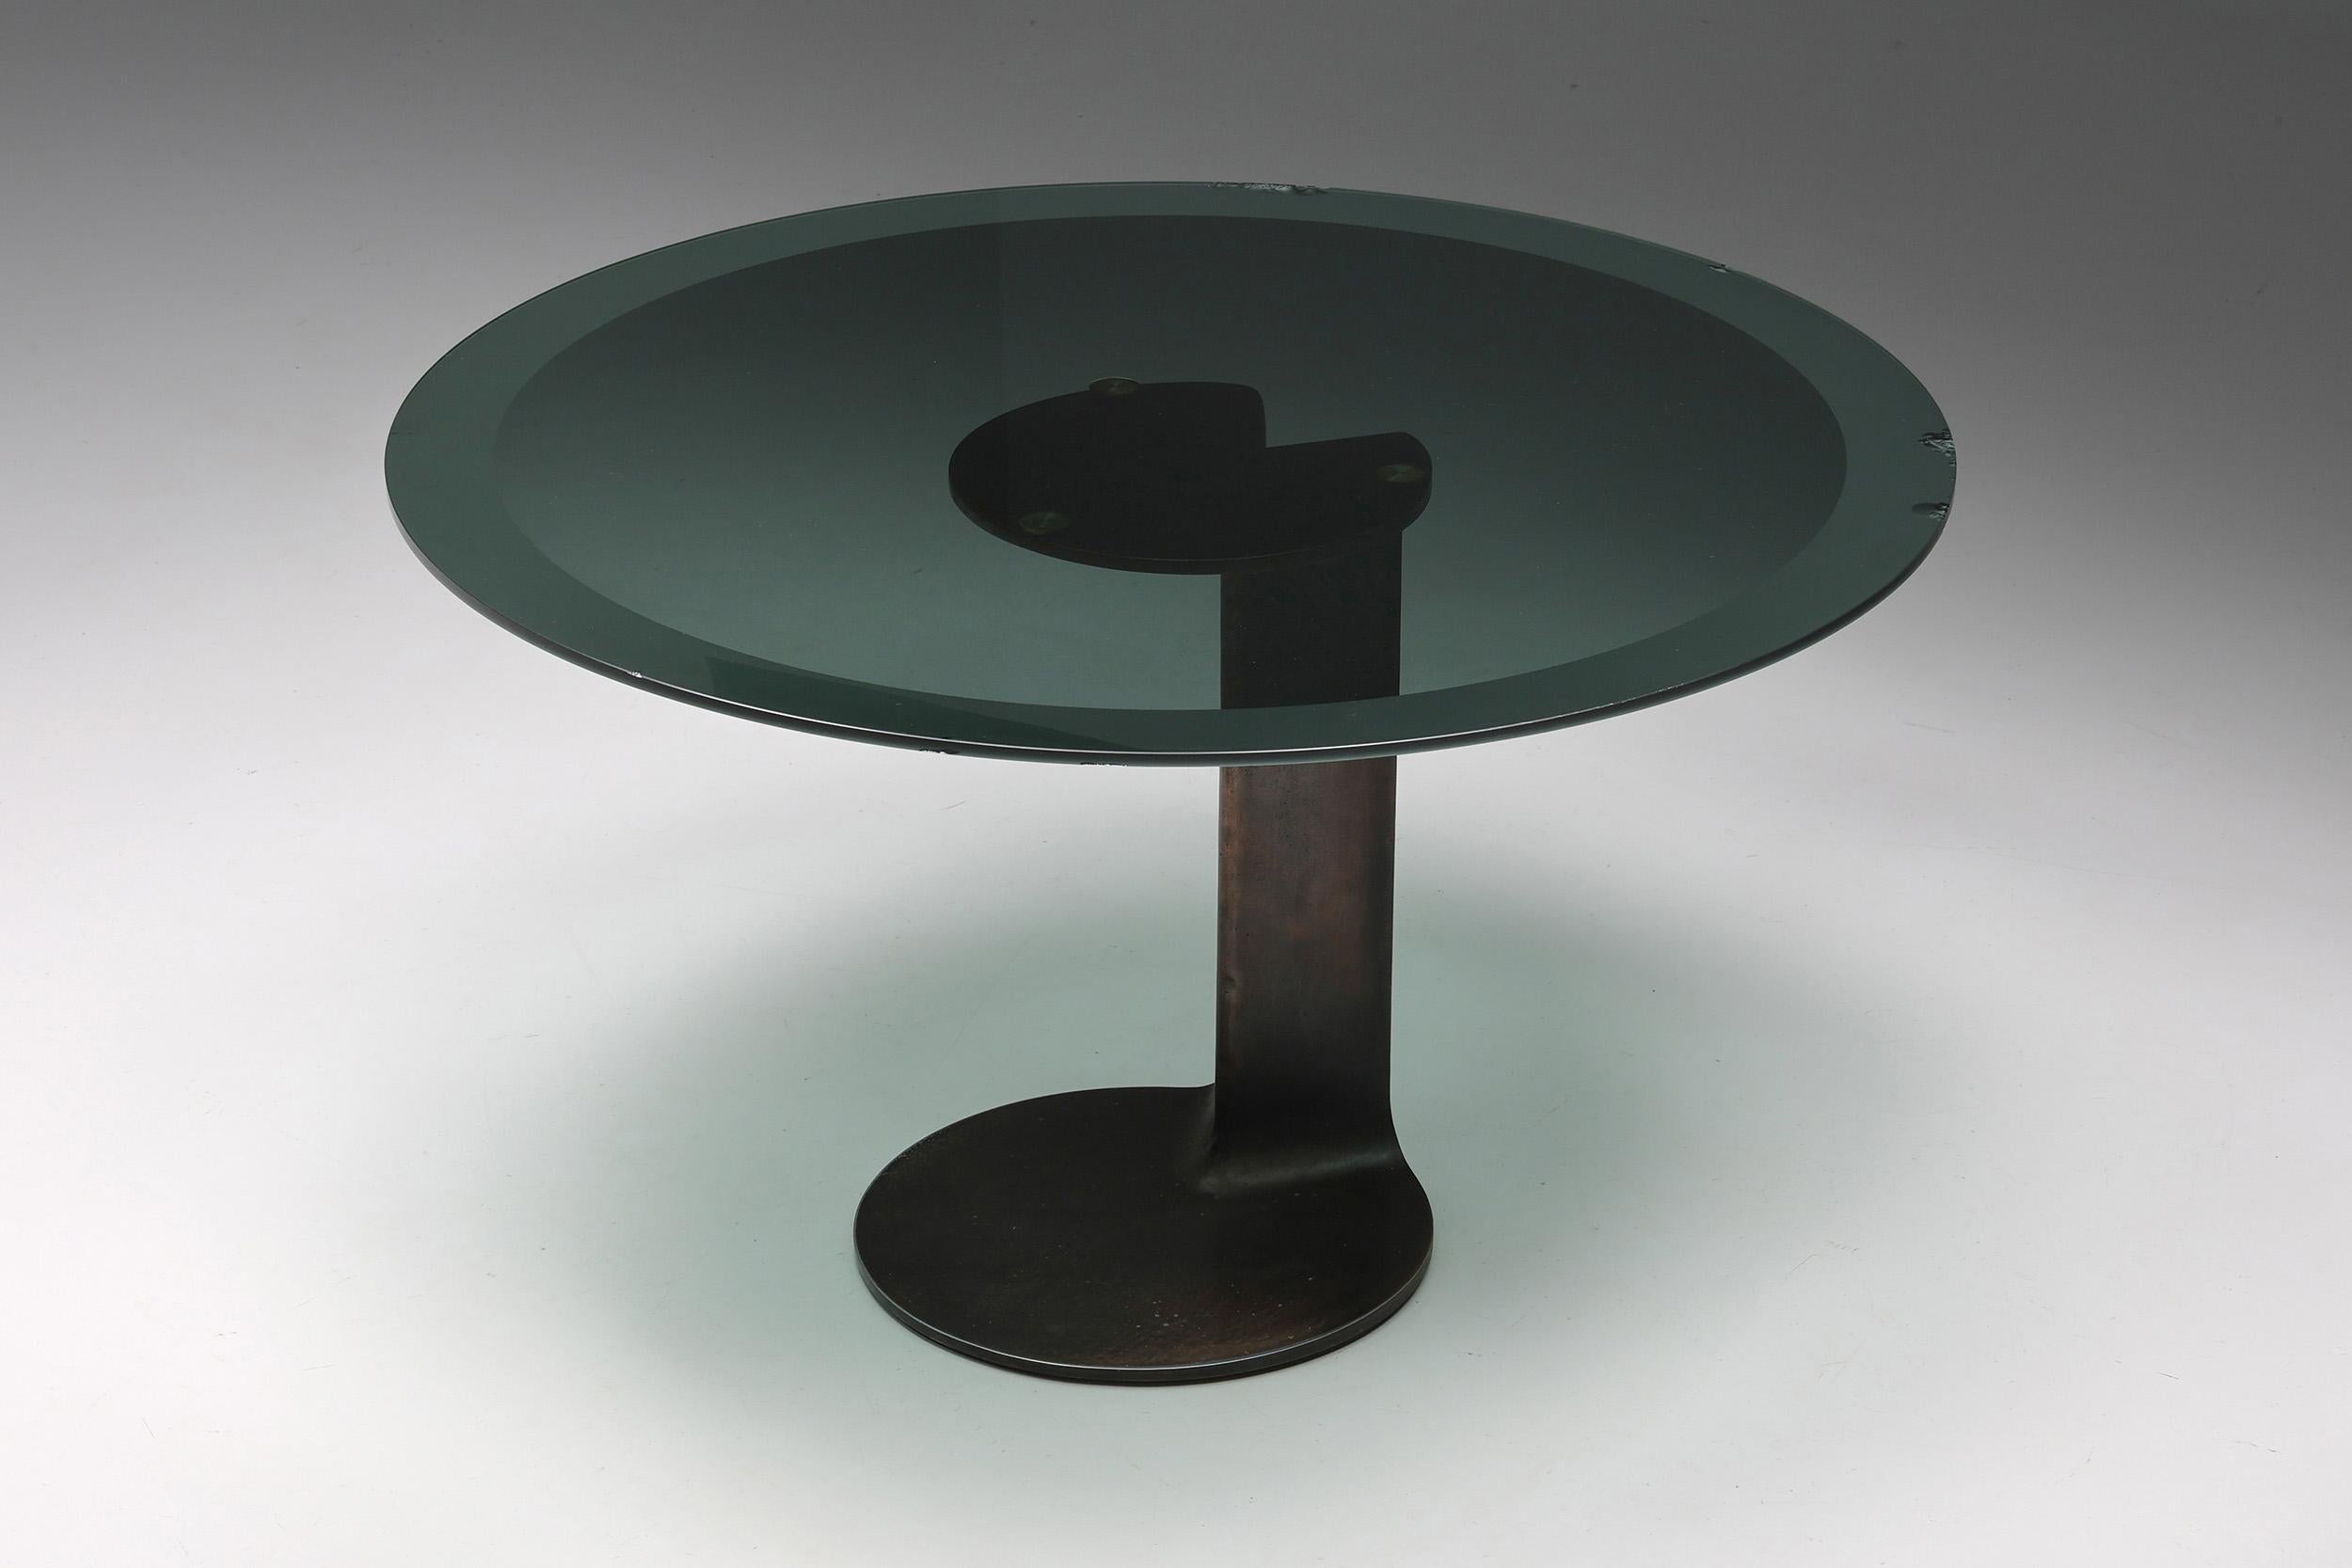 TL59; dining table; round; bronze; glass; Smoked glass; Afra & Tobia Scarpa; Poggi; 1975; Italy; Italian Design; Post-Modern; 
 
This remarkable round dining table is designed by Afra & Tobia Scarpa for Poggi in 1975. It's a very rare piece by one